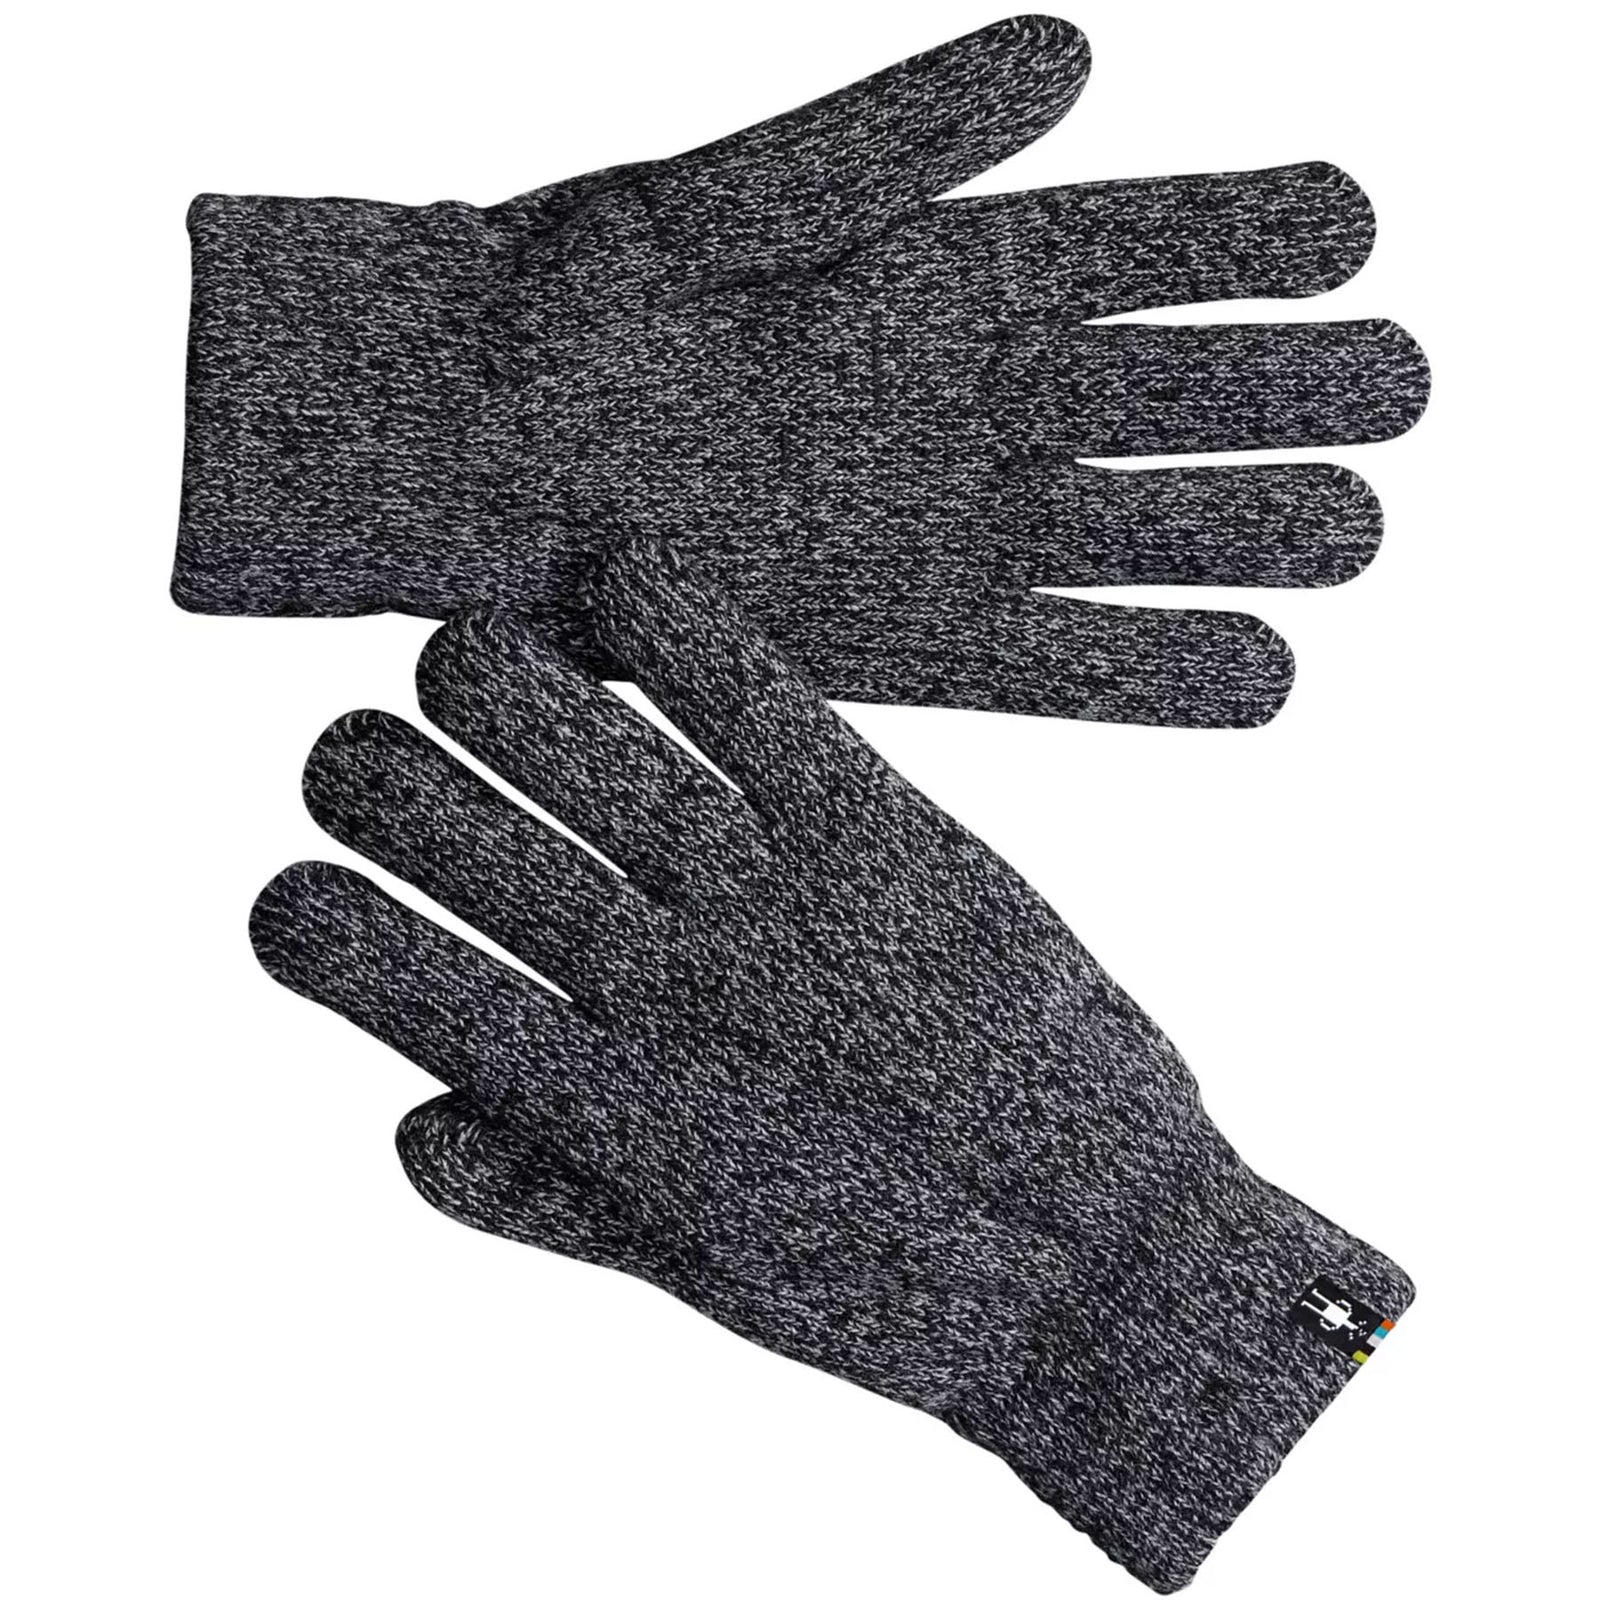 a pair of smartwool cozy gloves in black